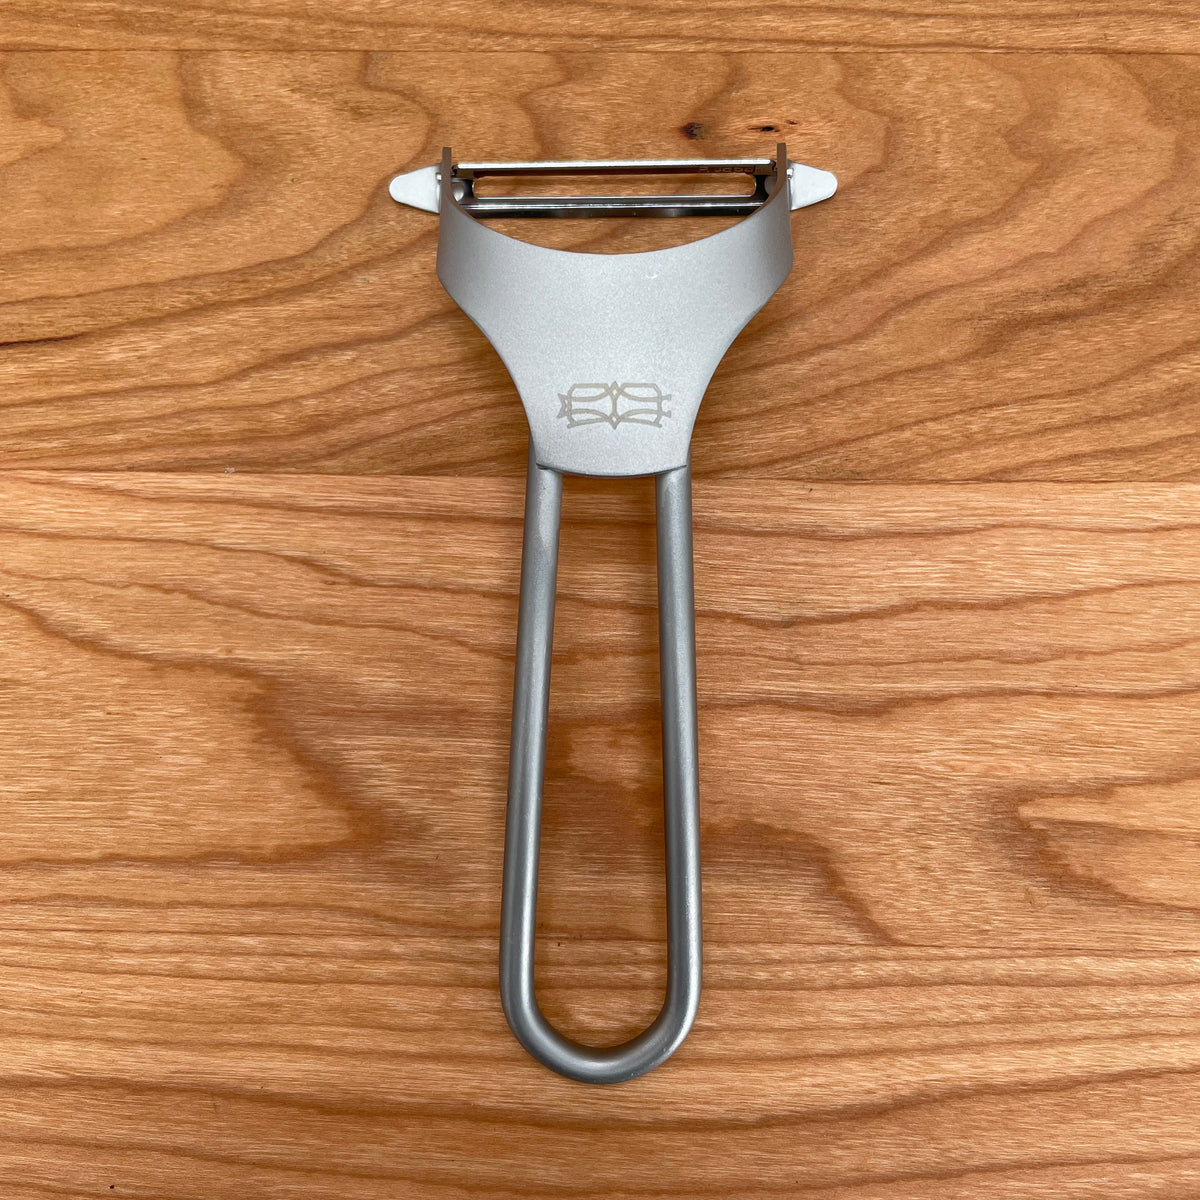 Peeler for Young Chefs